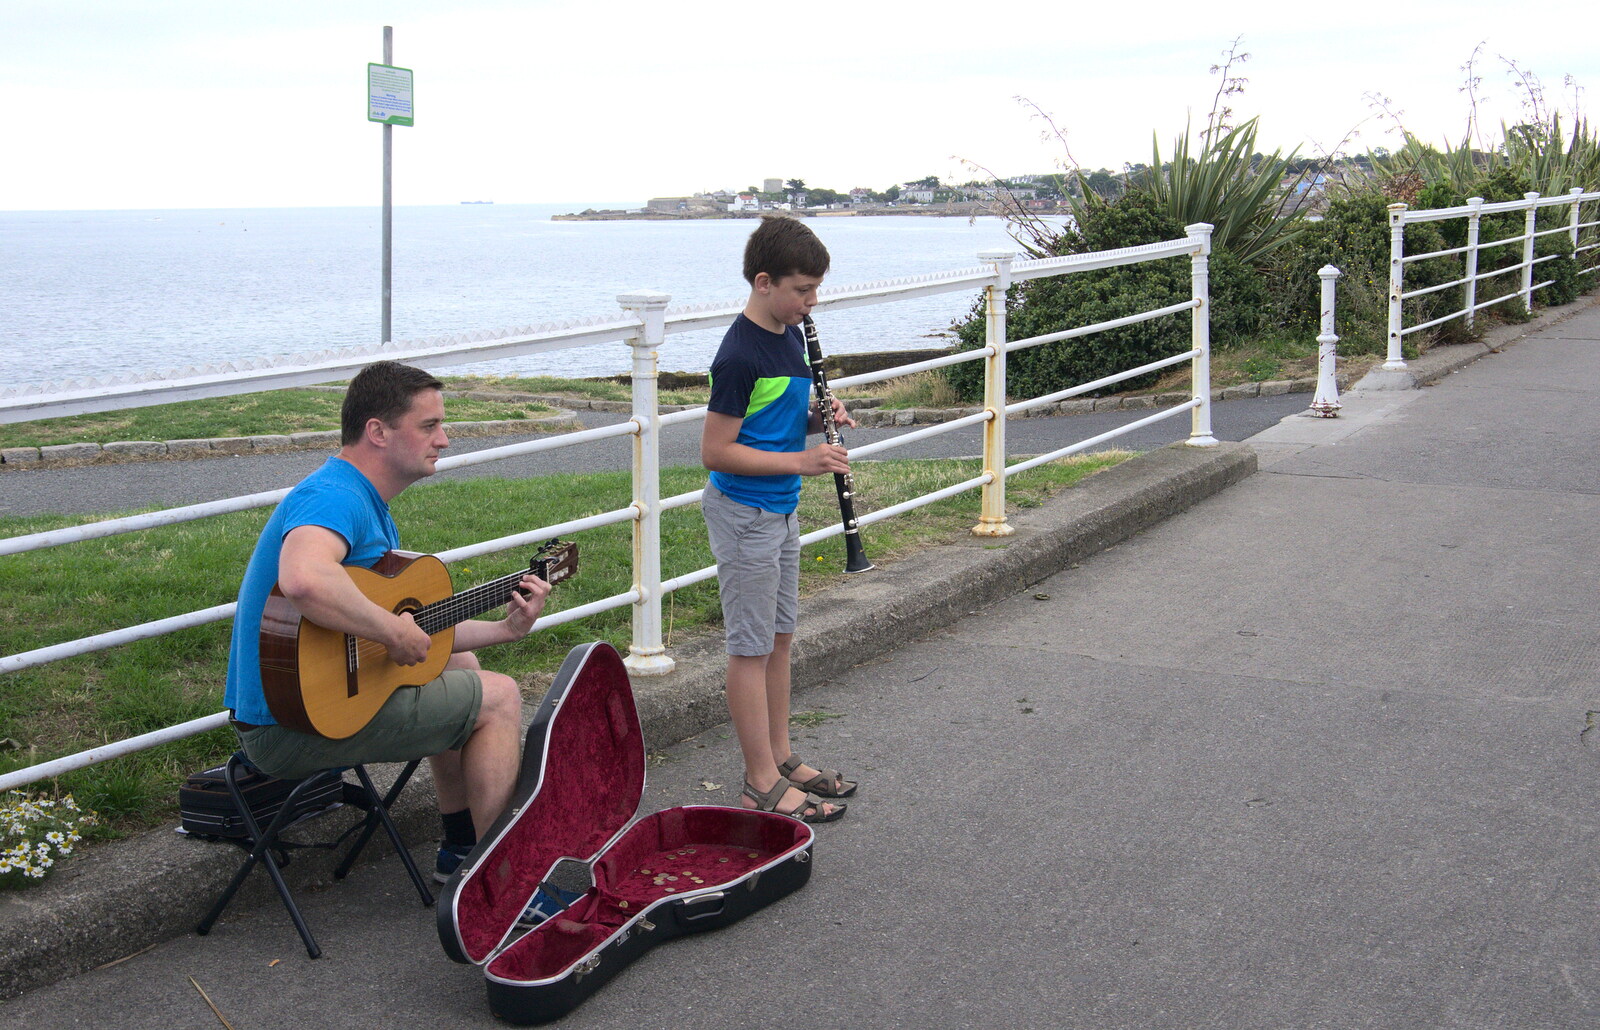 A father/son busking combo, with clarinet from The Dún Laoghaire 10k Run, County Dublin, Ireland - 6th August 2018